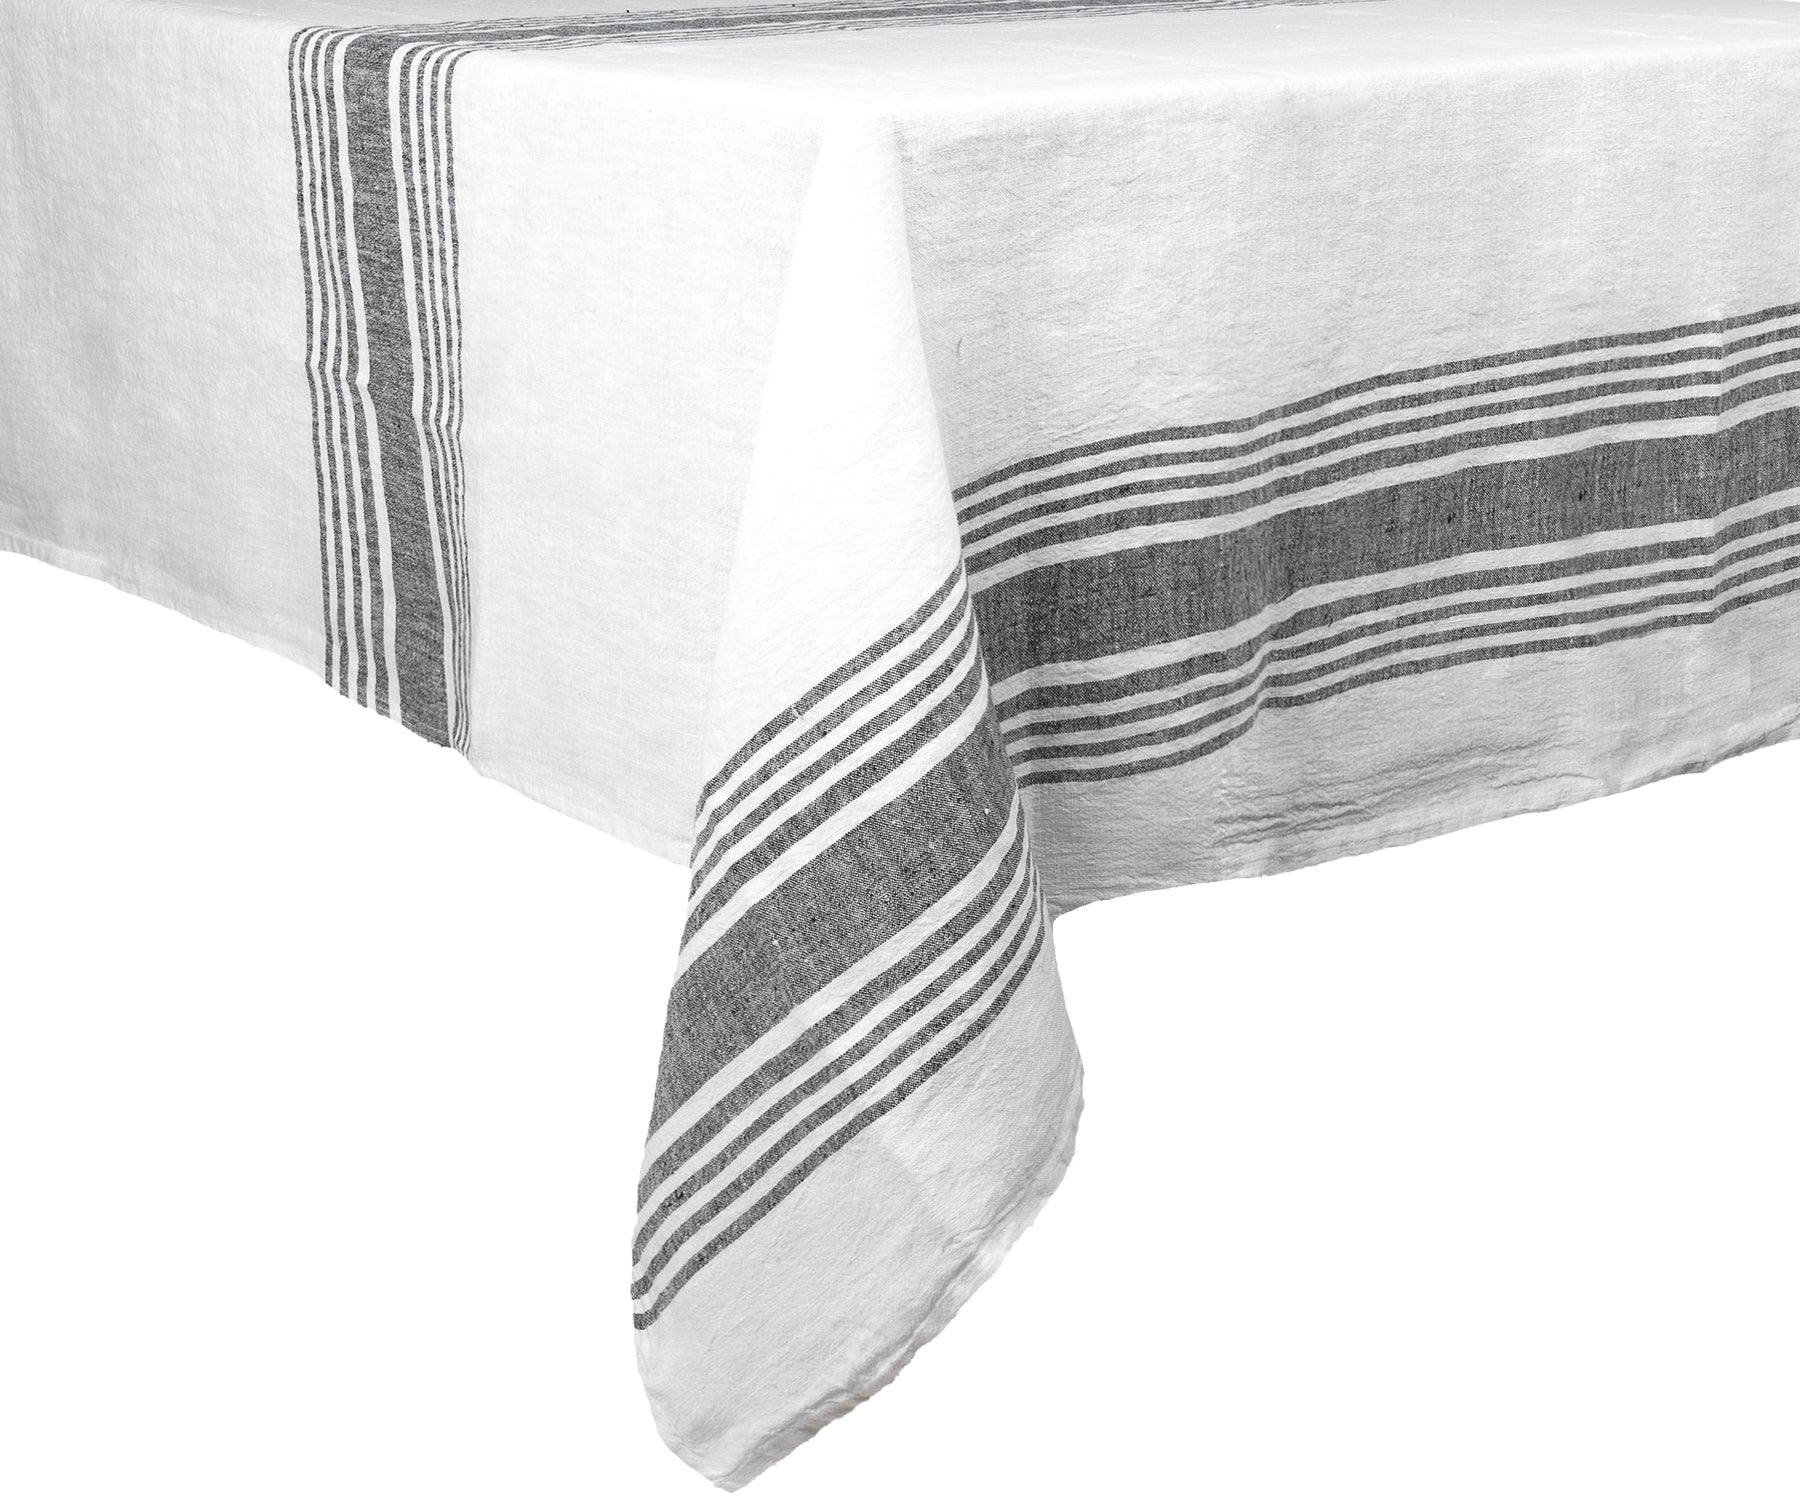 Sophisticated white and gray striped linen tablecloth on a dining table